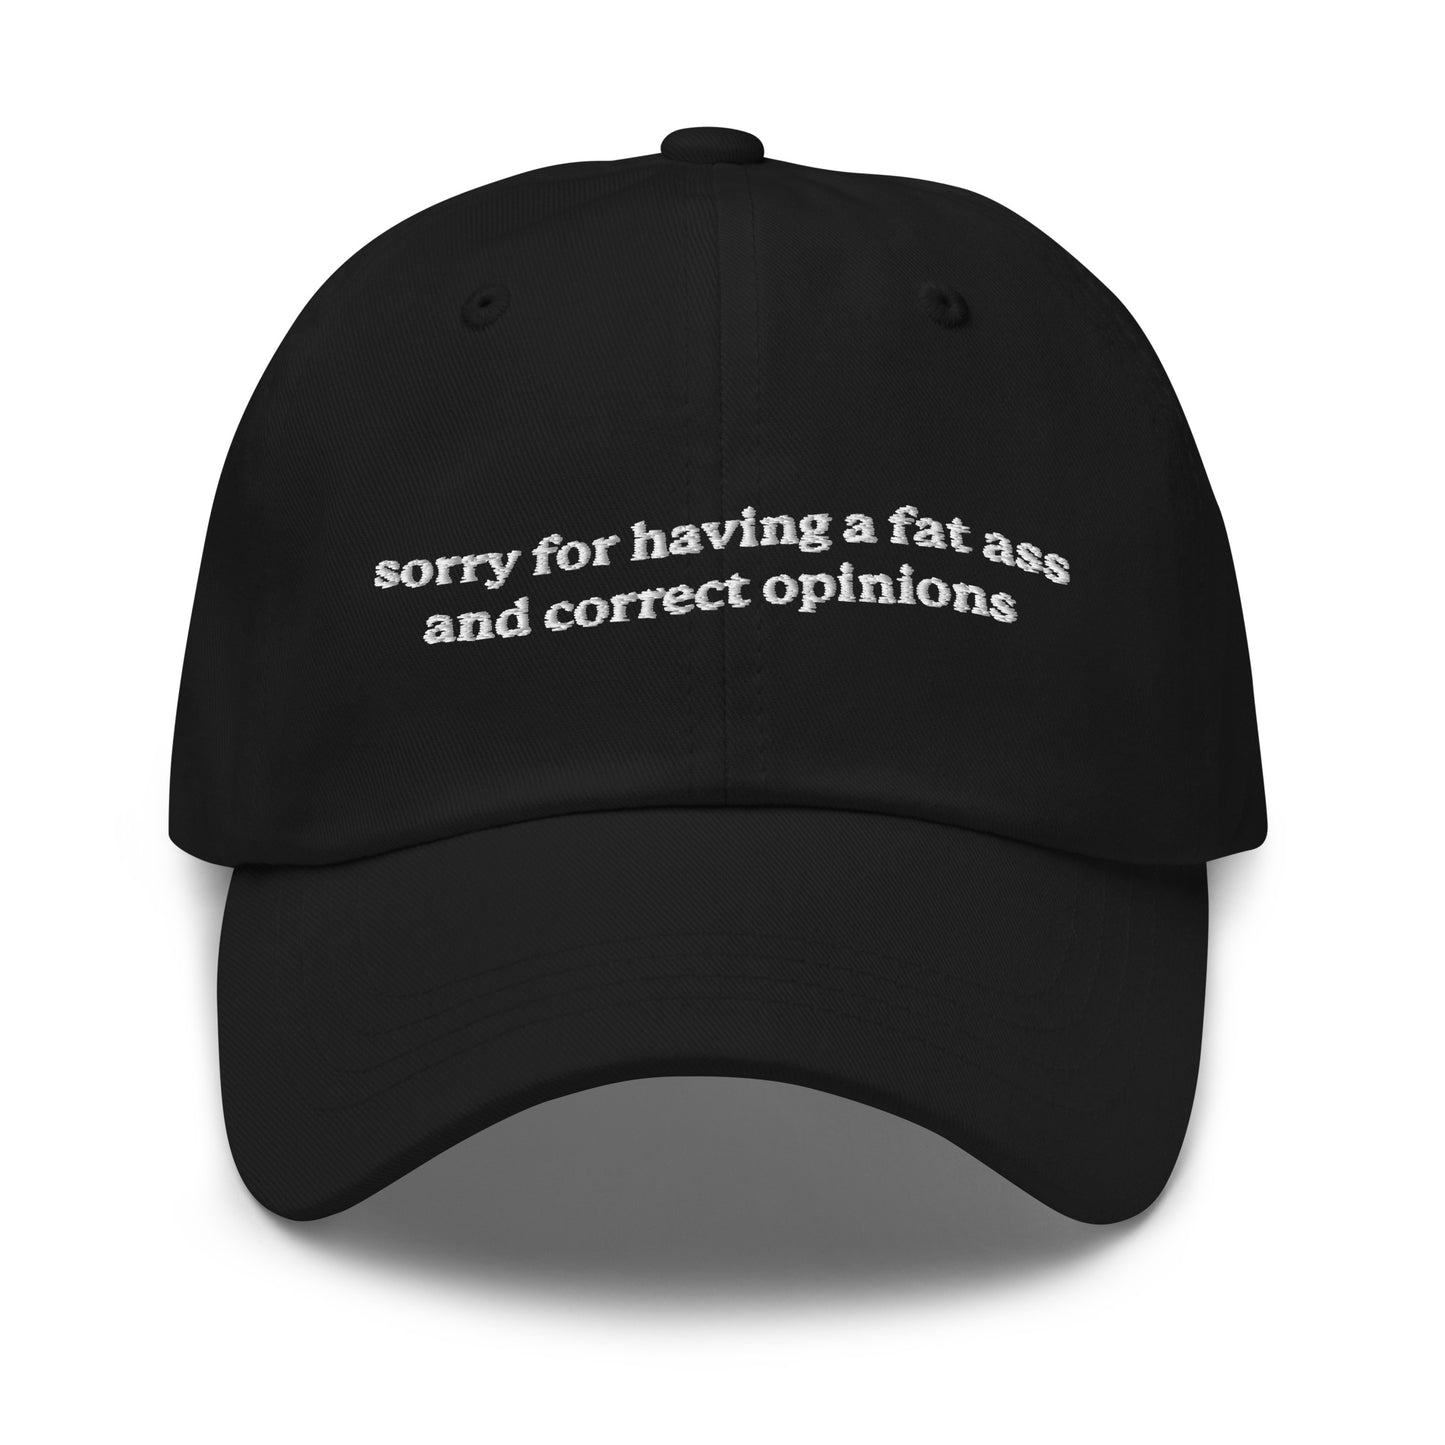 Fat Ass & Correct Opinions hat